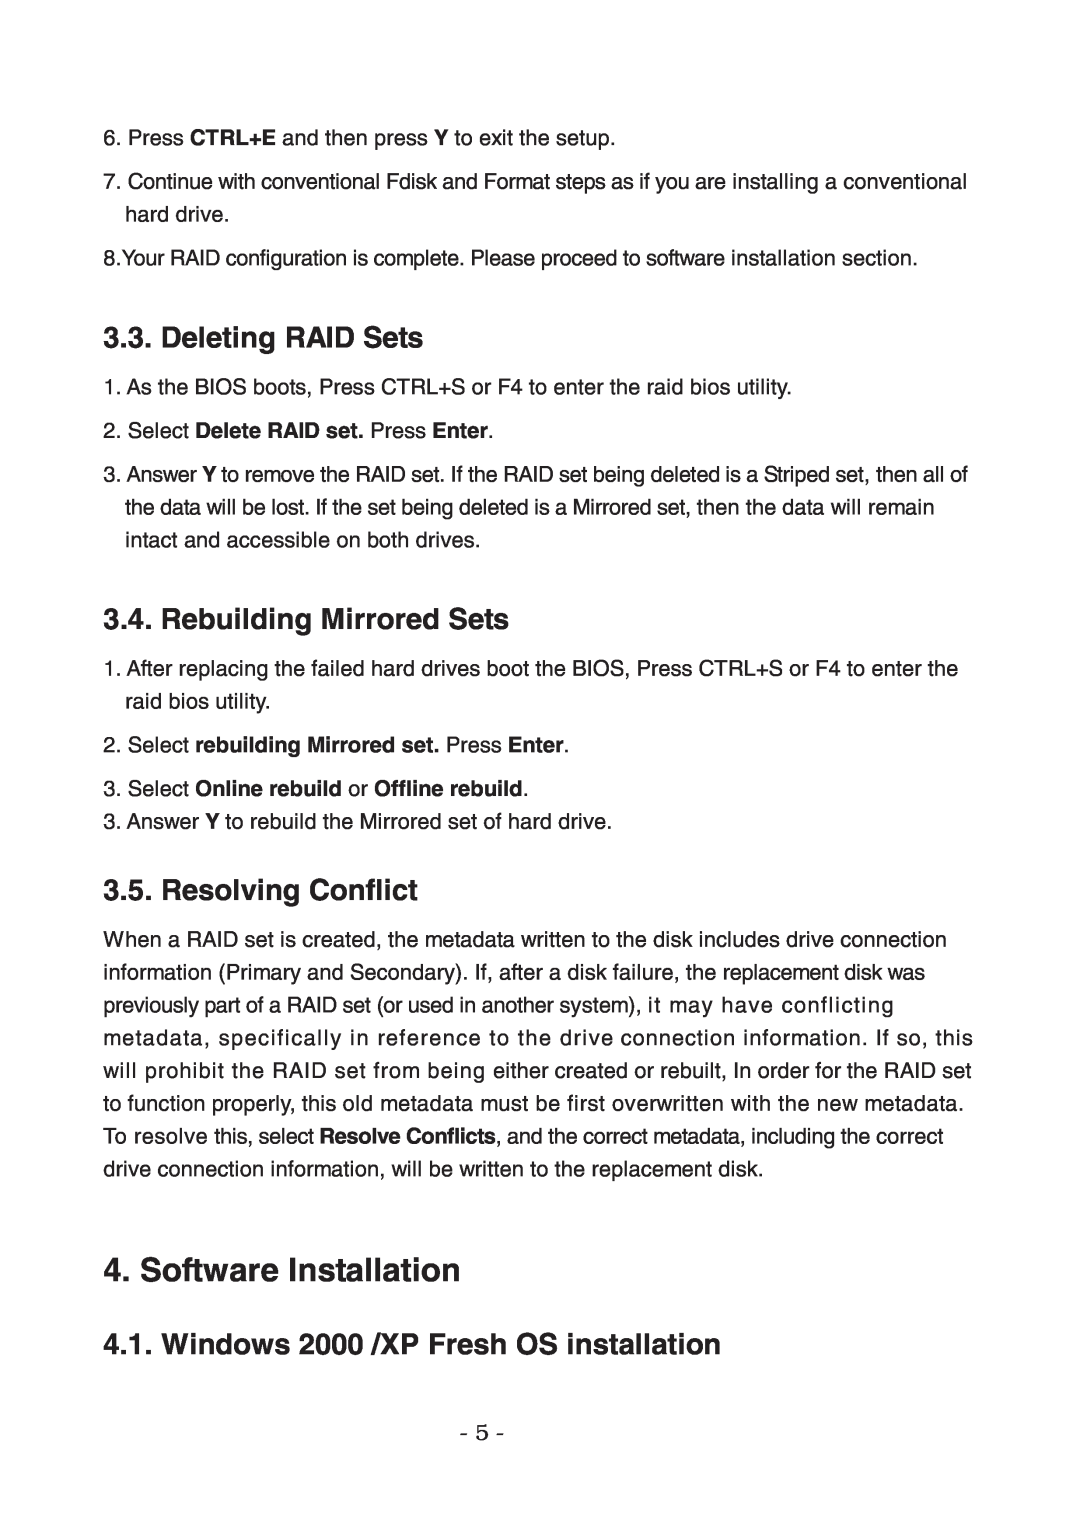 Lindy 70536 user manual Software Installation, Deleting RAID Sets, Rebuilding Mirrored Sets, Resolving Conflict 